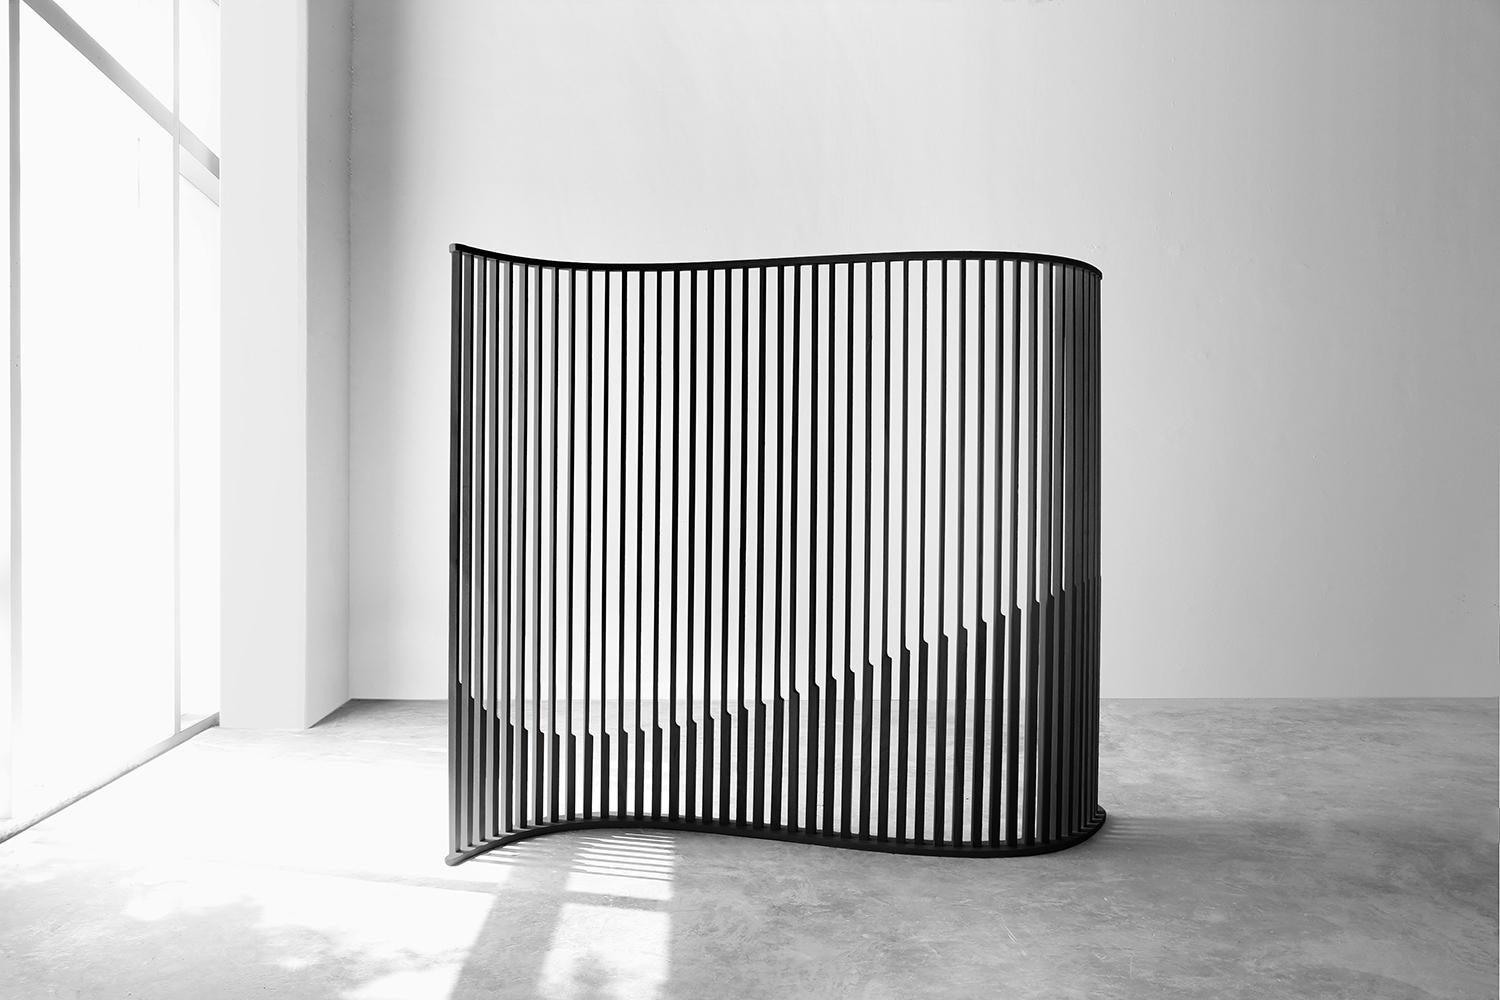 Laws of Motion Small Room Divider in Dark Wood, Screen by Joel Escalona

Laws of Motion is a furniture collection that through a series of different typologies explores concepts like force, gravity and movement. Each of these functional sculptures